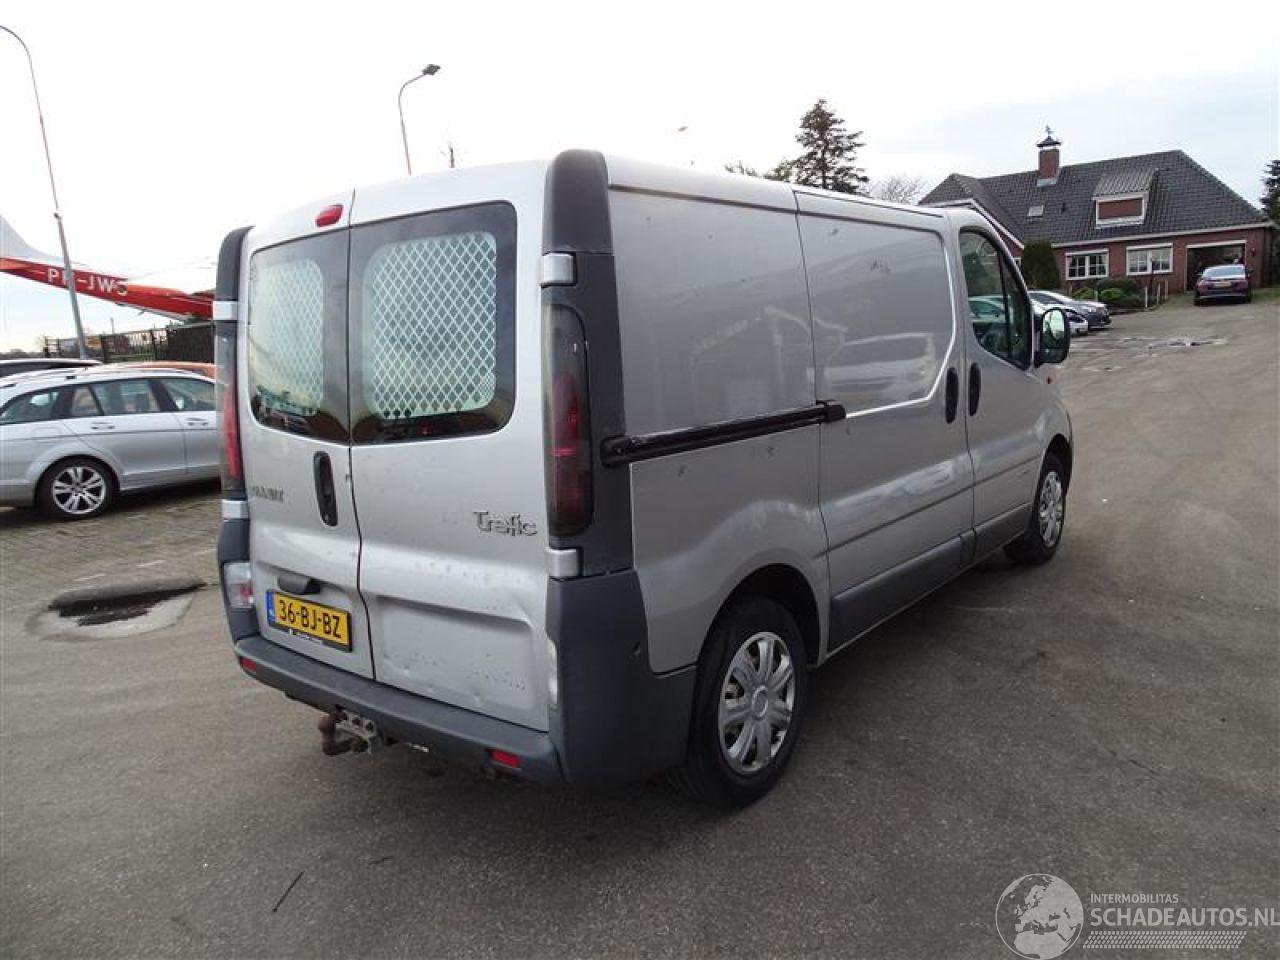 Renault Trafic 1.9 dCi